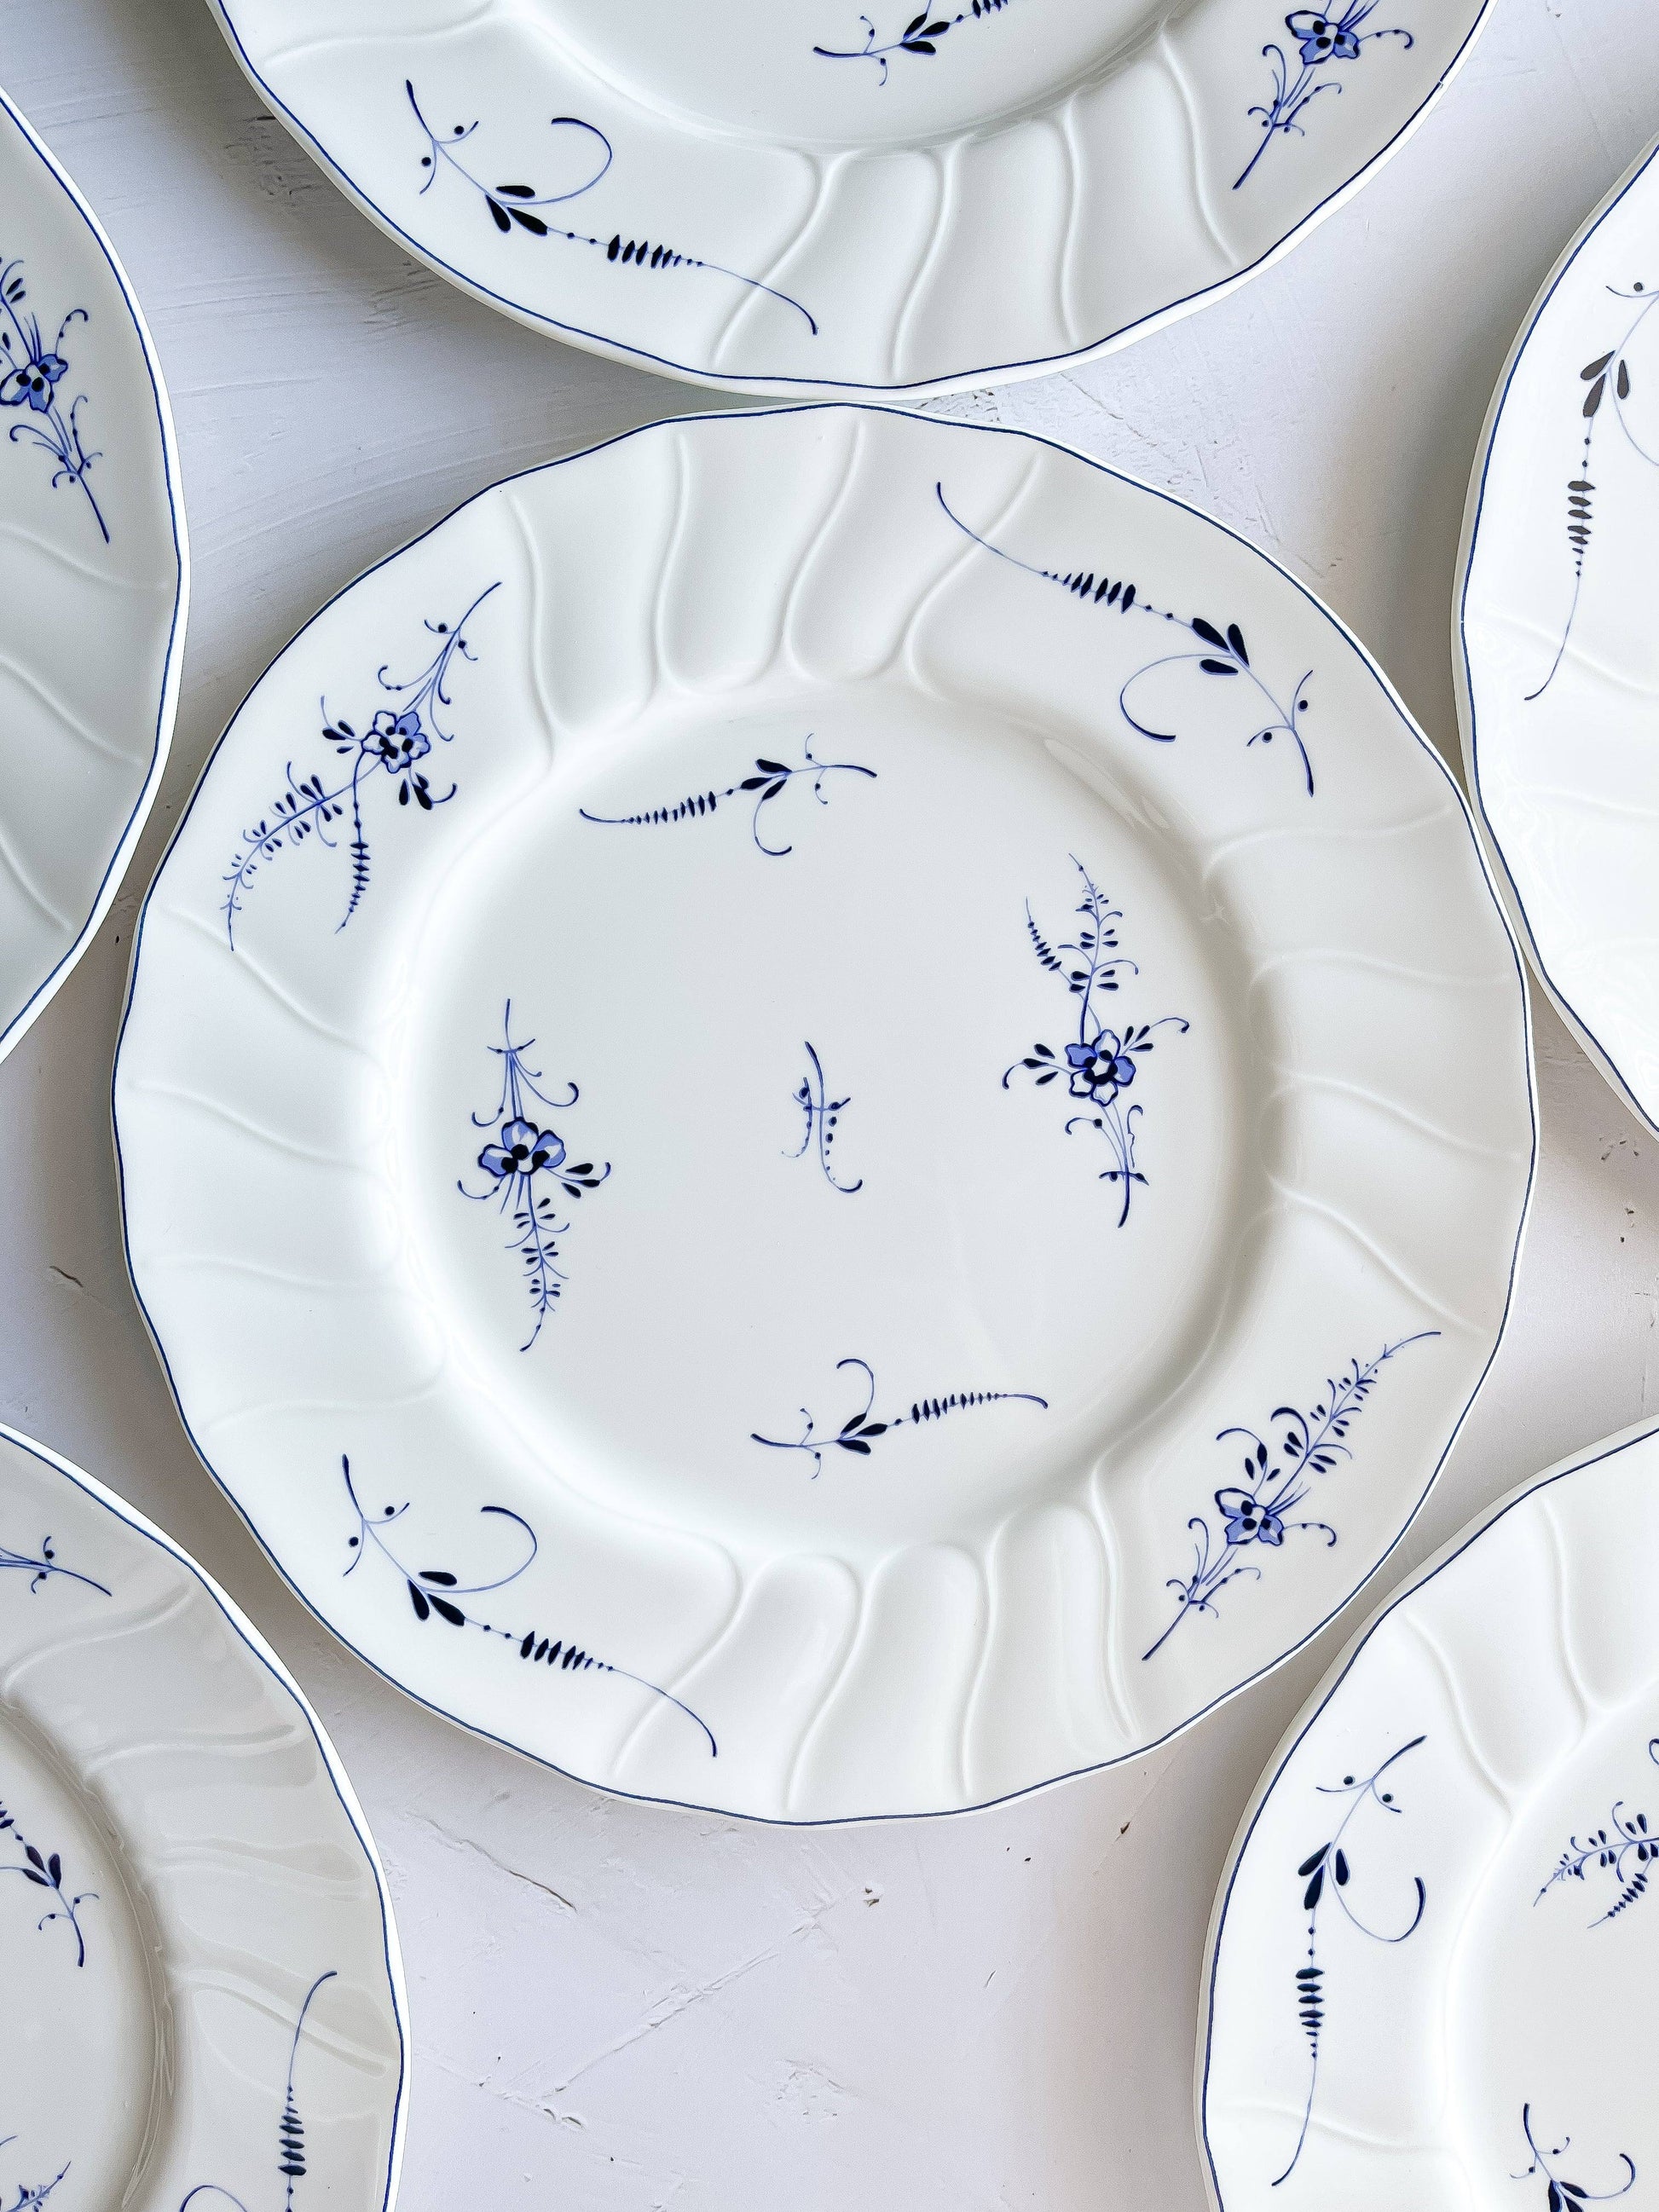 Villeroy & Boch 'Vieux Luxembourg' Dinner Plates - Set of 6 - SOSC Home